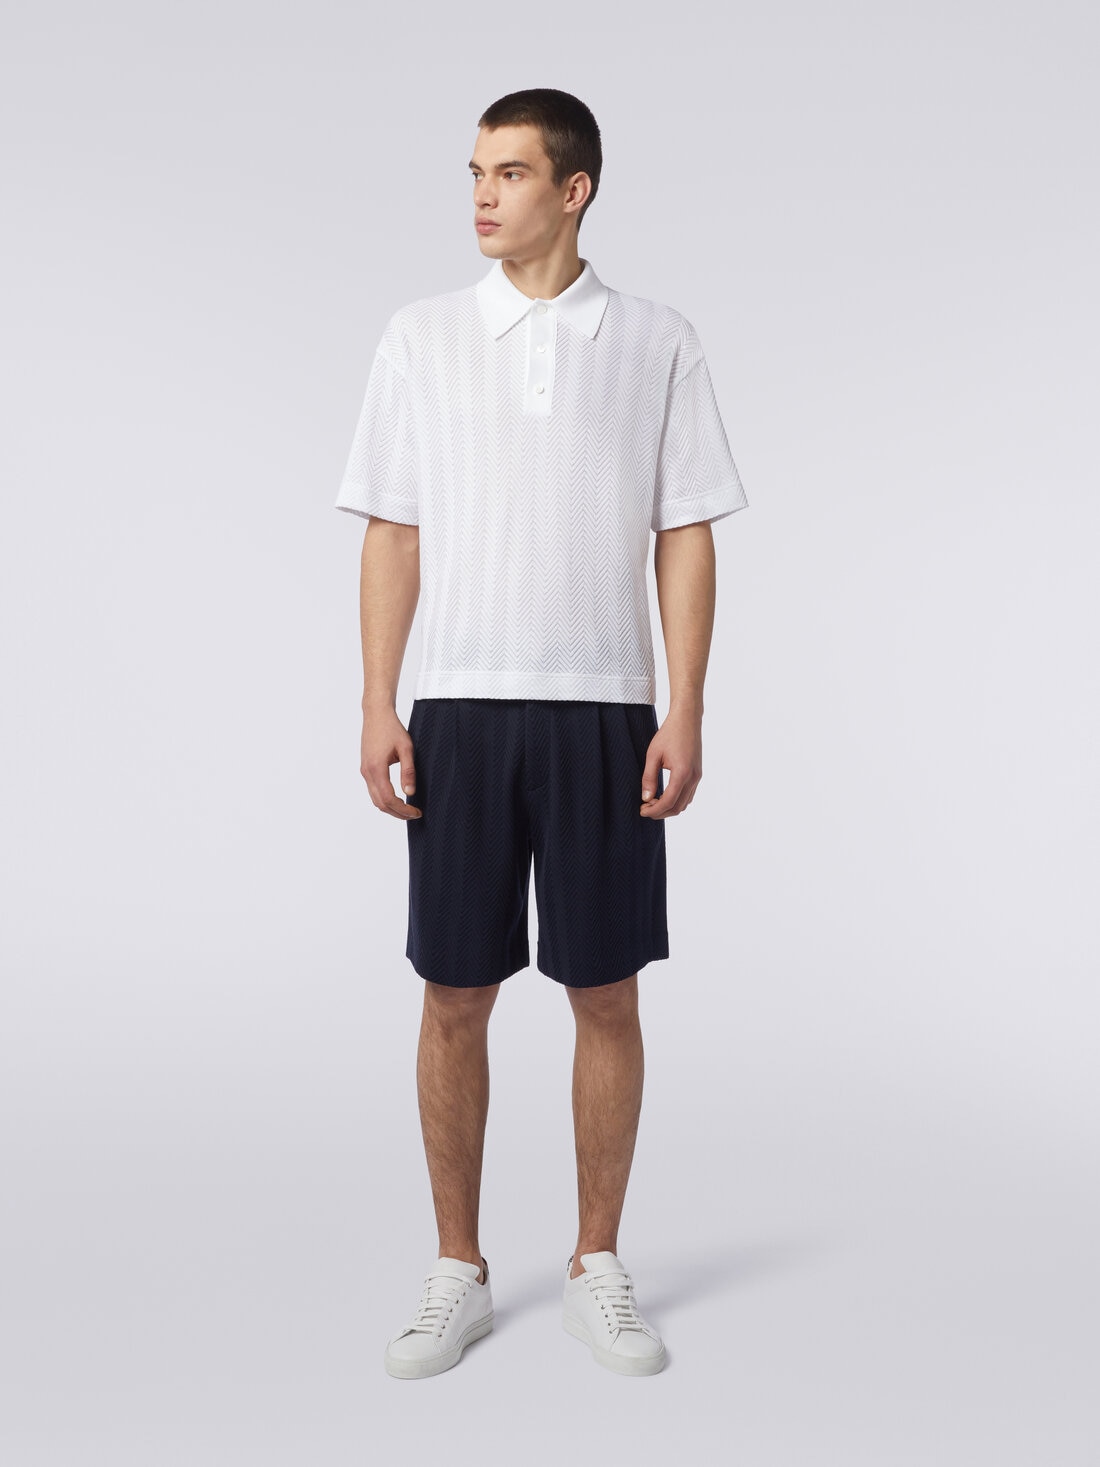 Short-sleeved polo shirt in chevron viscose and cotton, White  - US24S203BR00JC10601 - 1